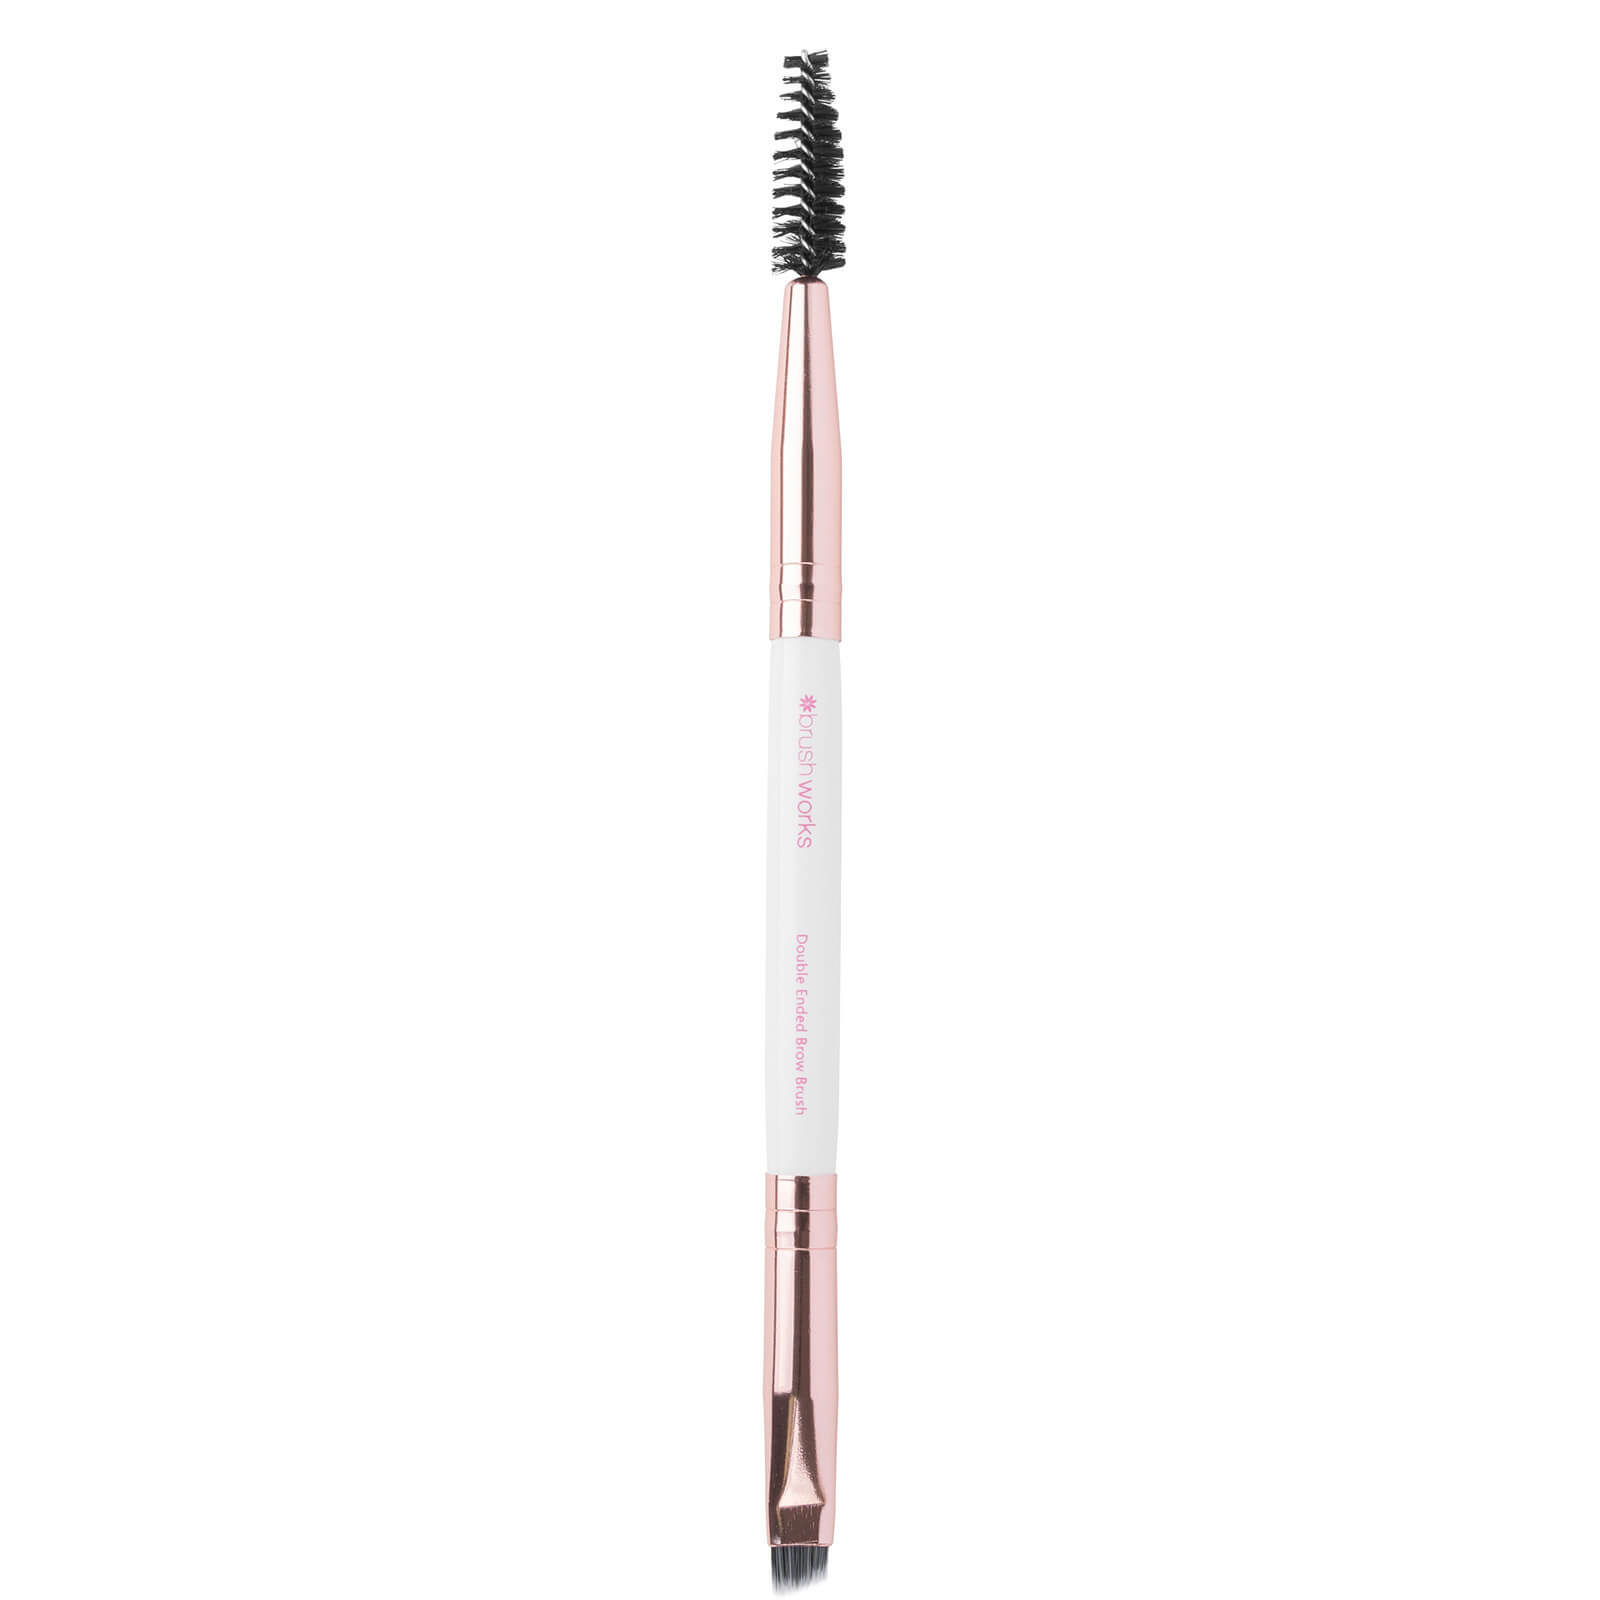 Image of Brushworks White and Gold Brow Duo Brush